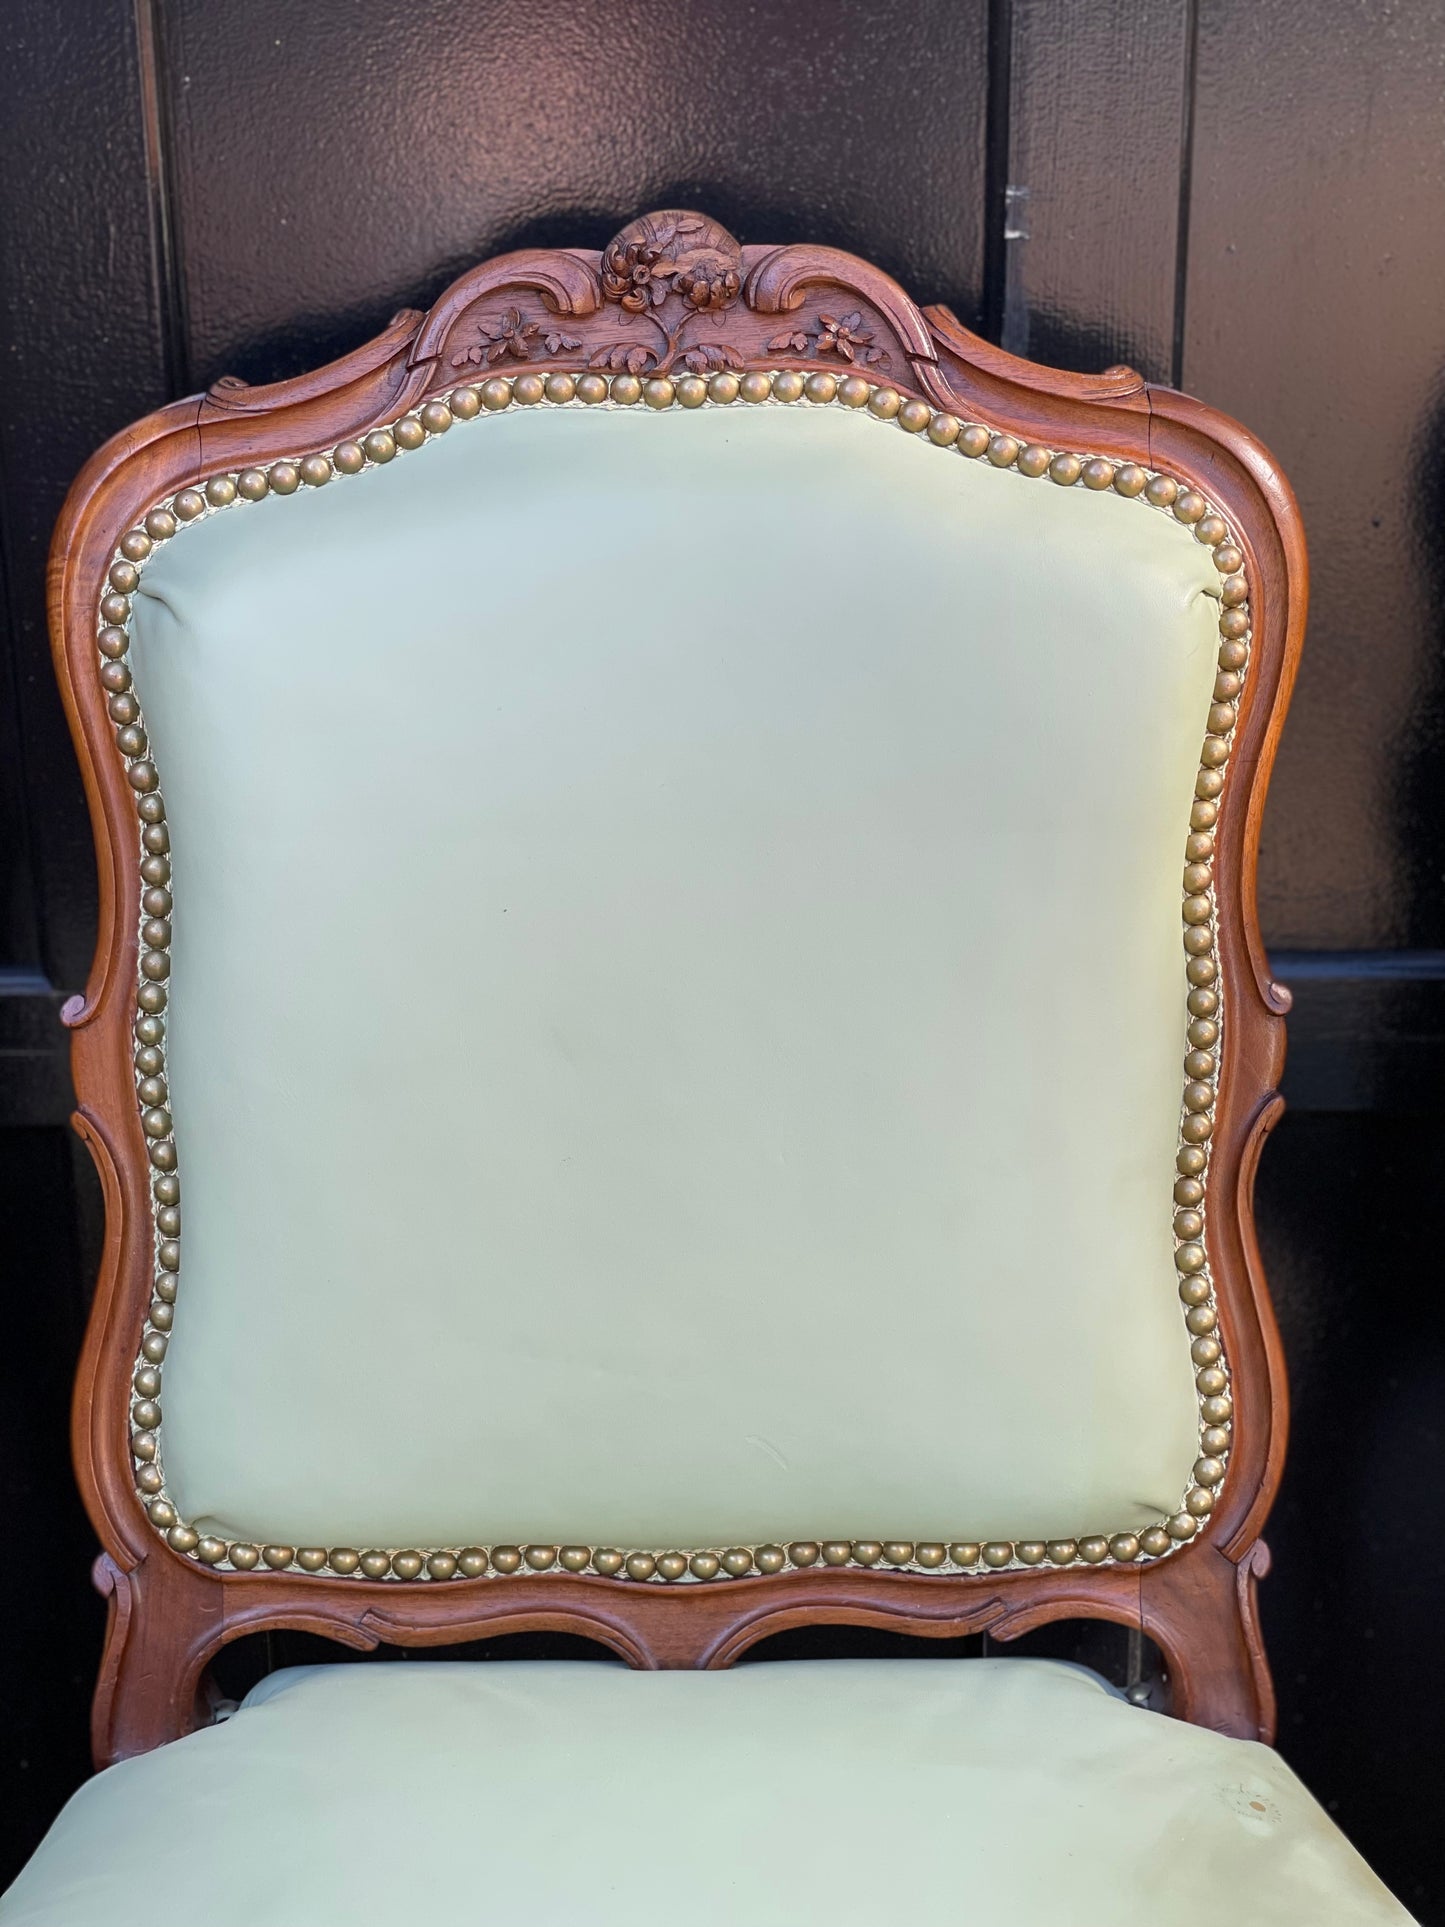 Antique chairs upholstered in pistachio leather, Louis XV